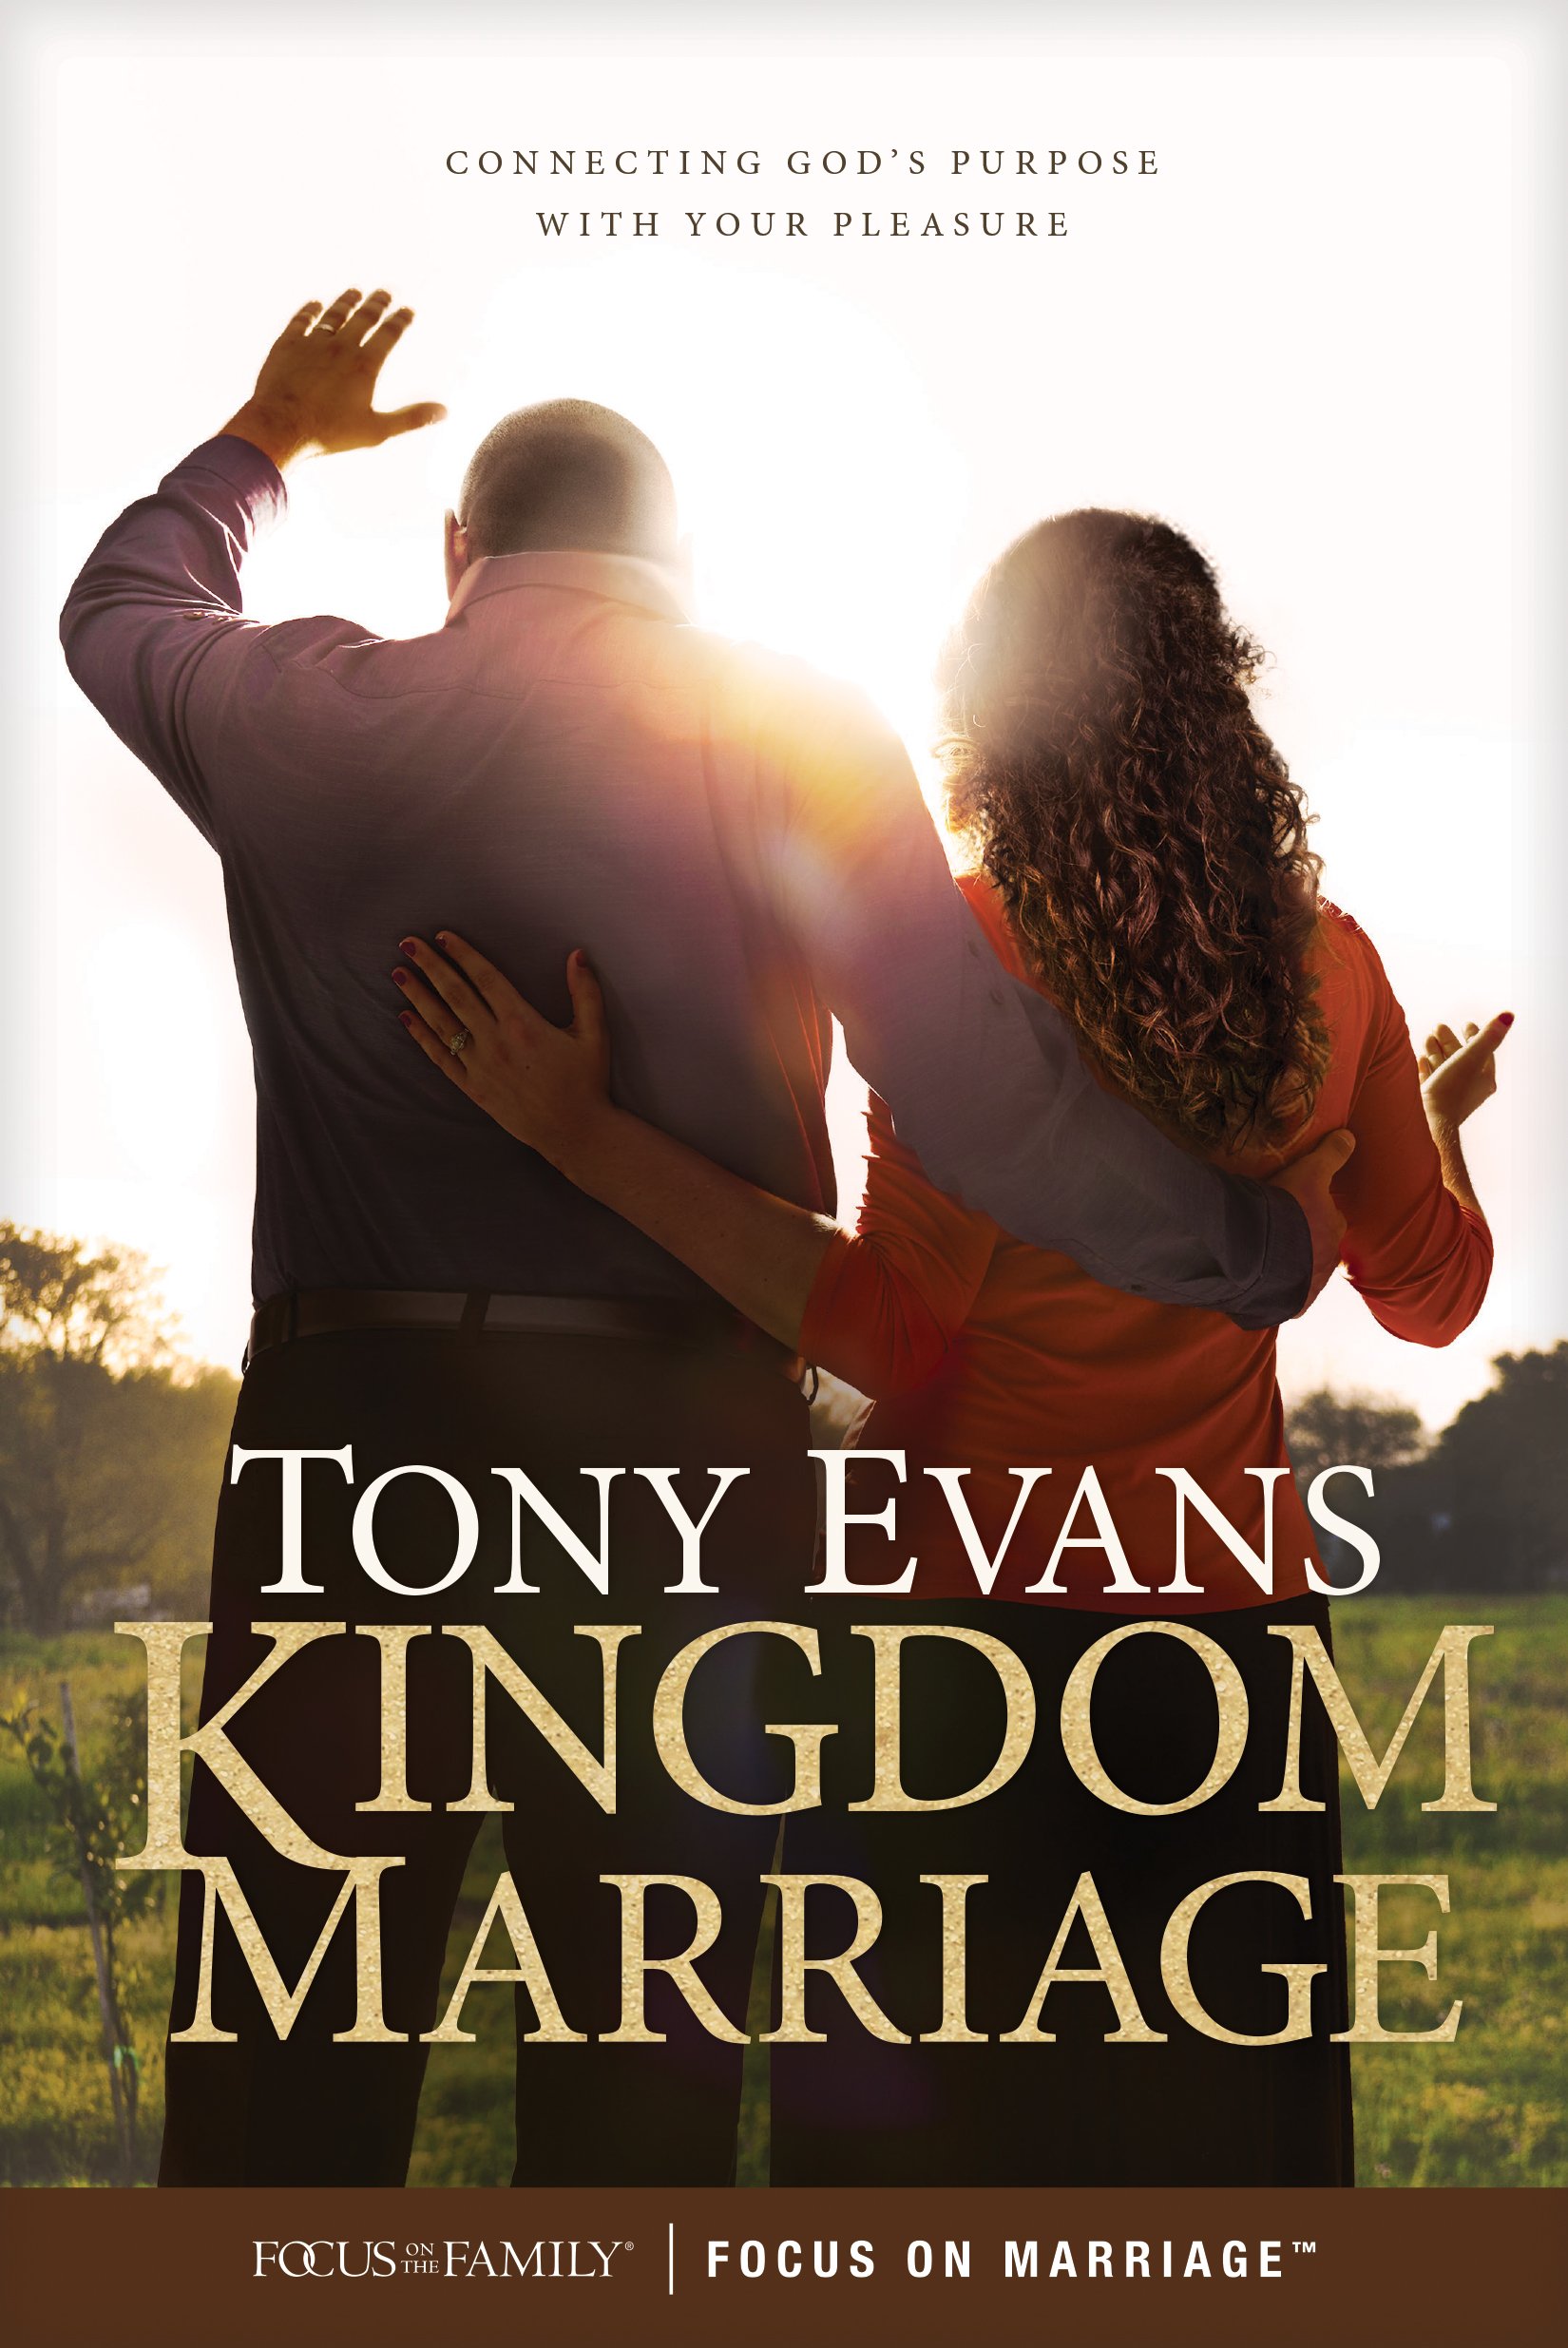 Kingdom Marriage: Connecting God's Purpose with Your Pleasure Paperback – 6 Feb 2018